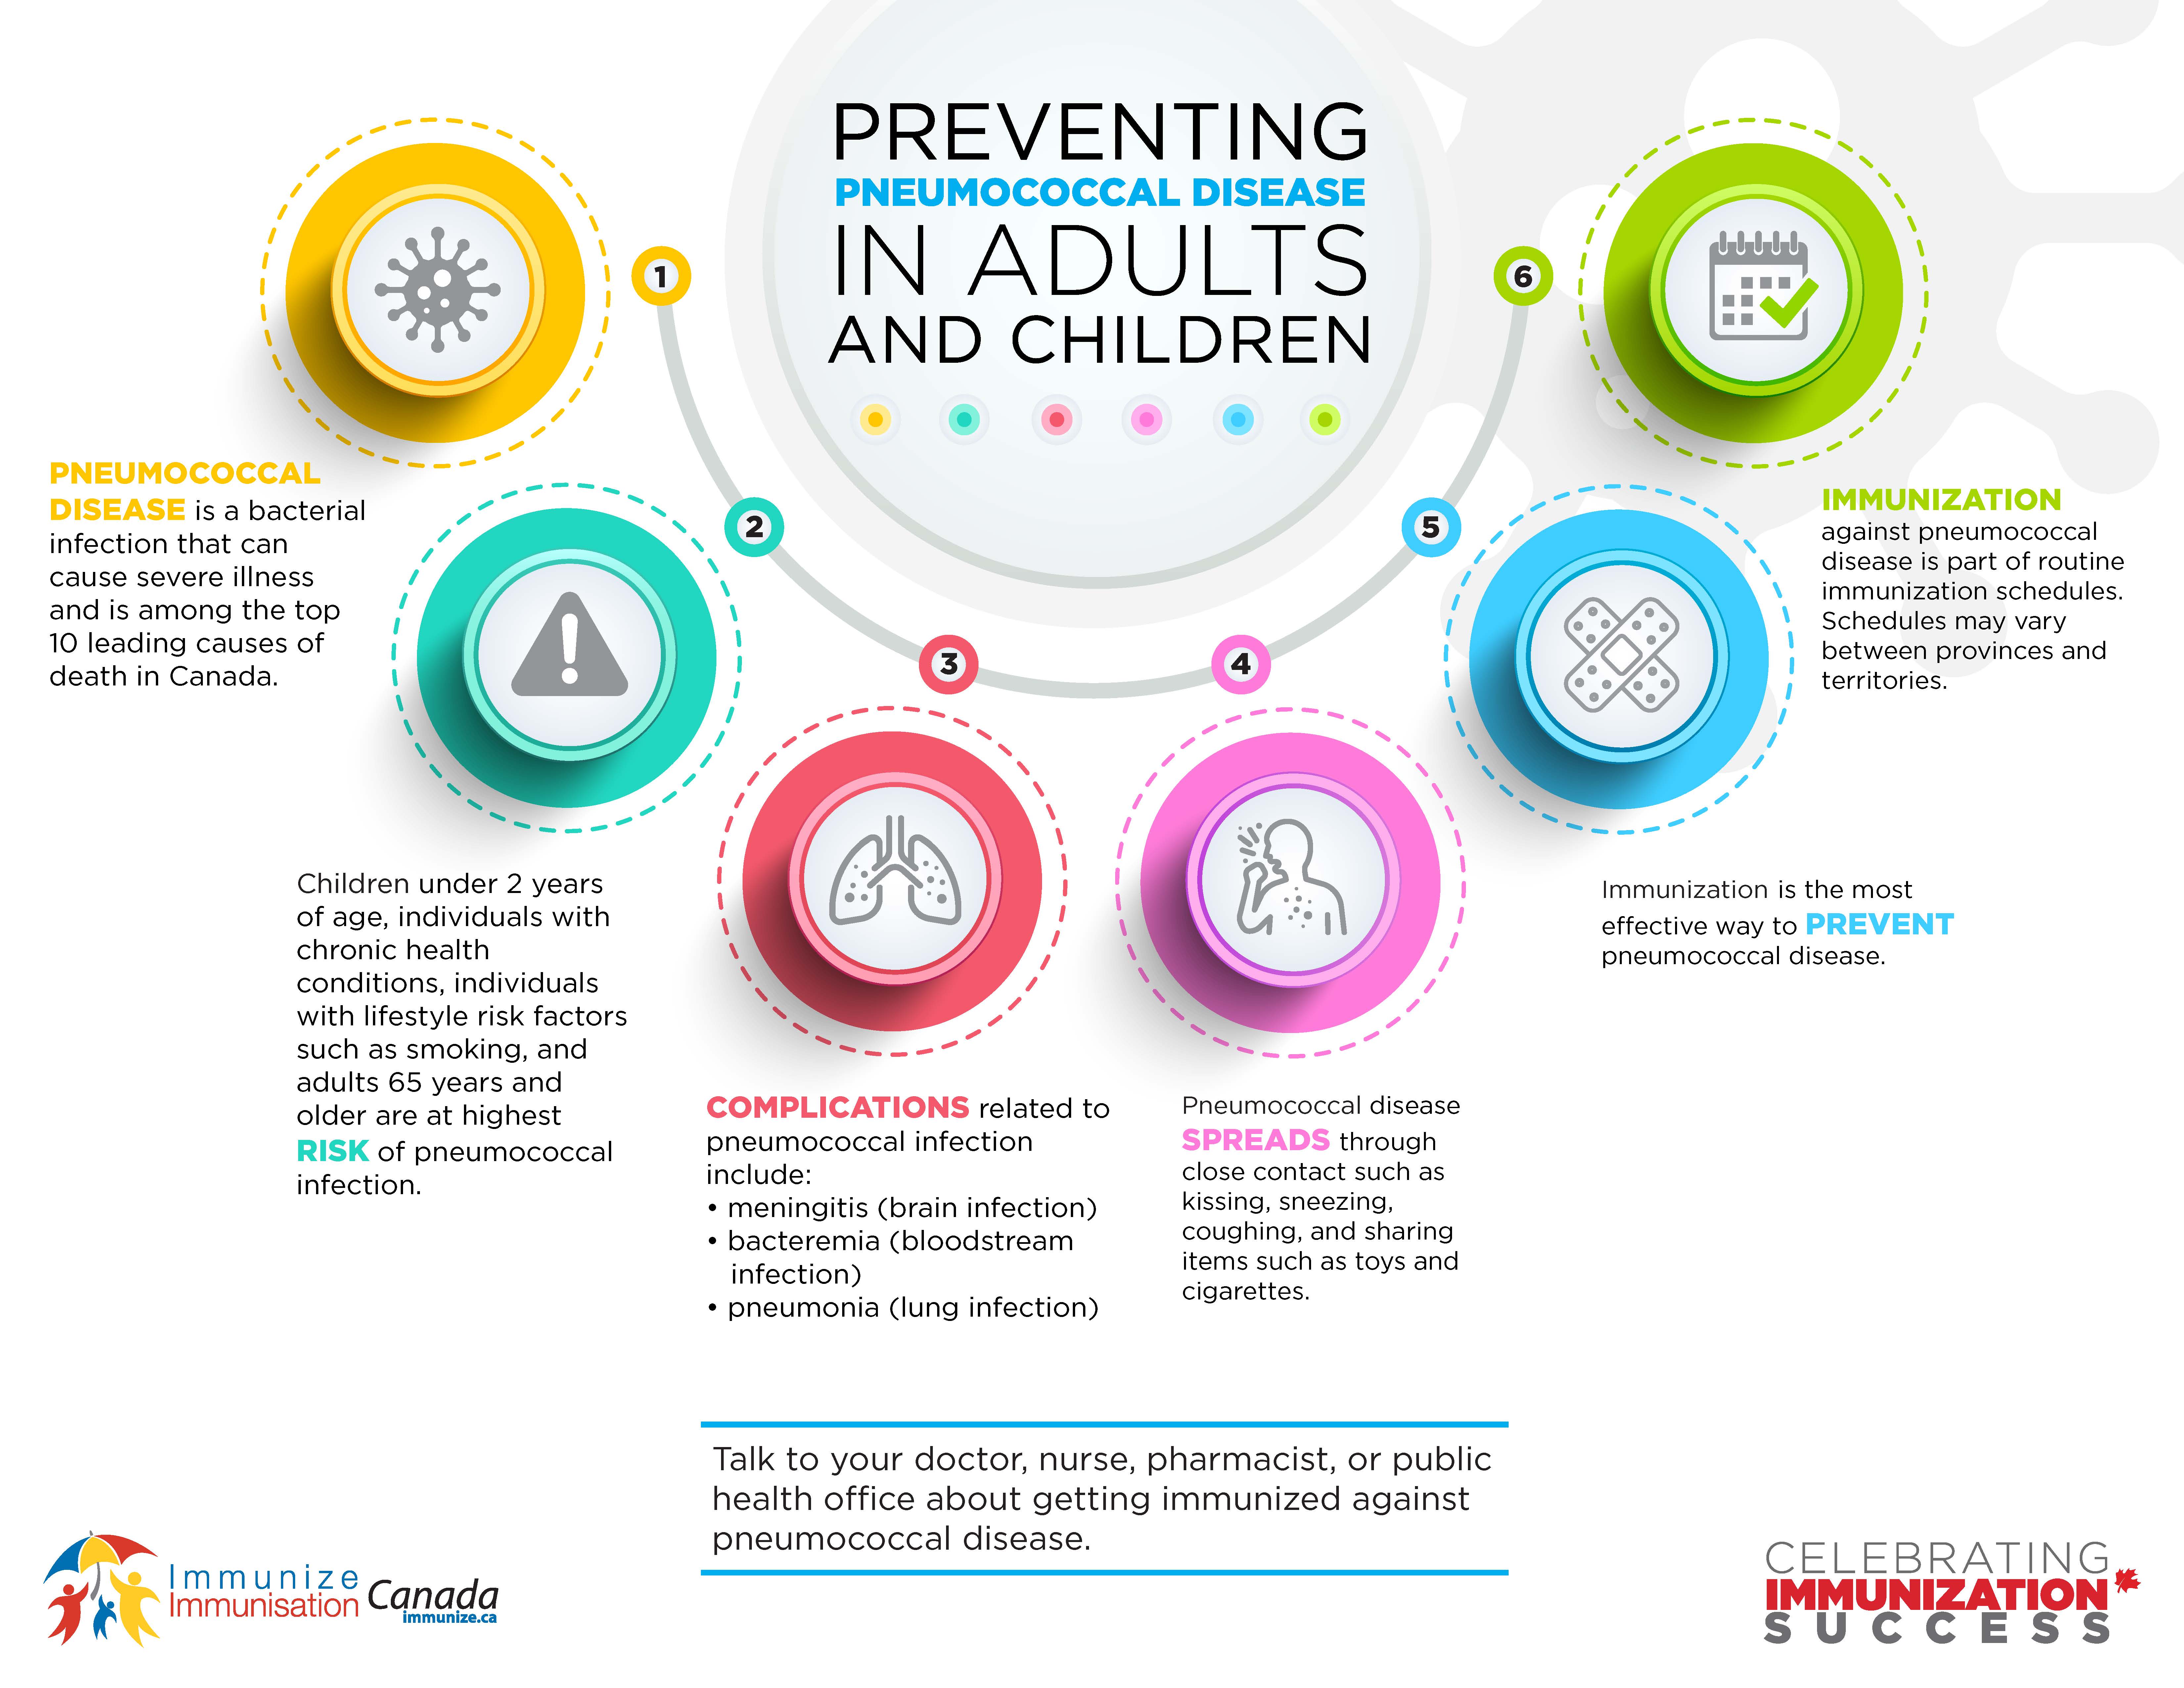 Preventing Pneumococcal Disease in Adults and Children - infographic